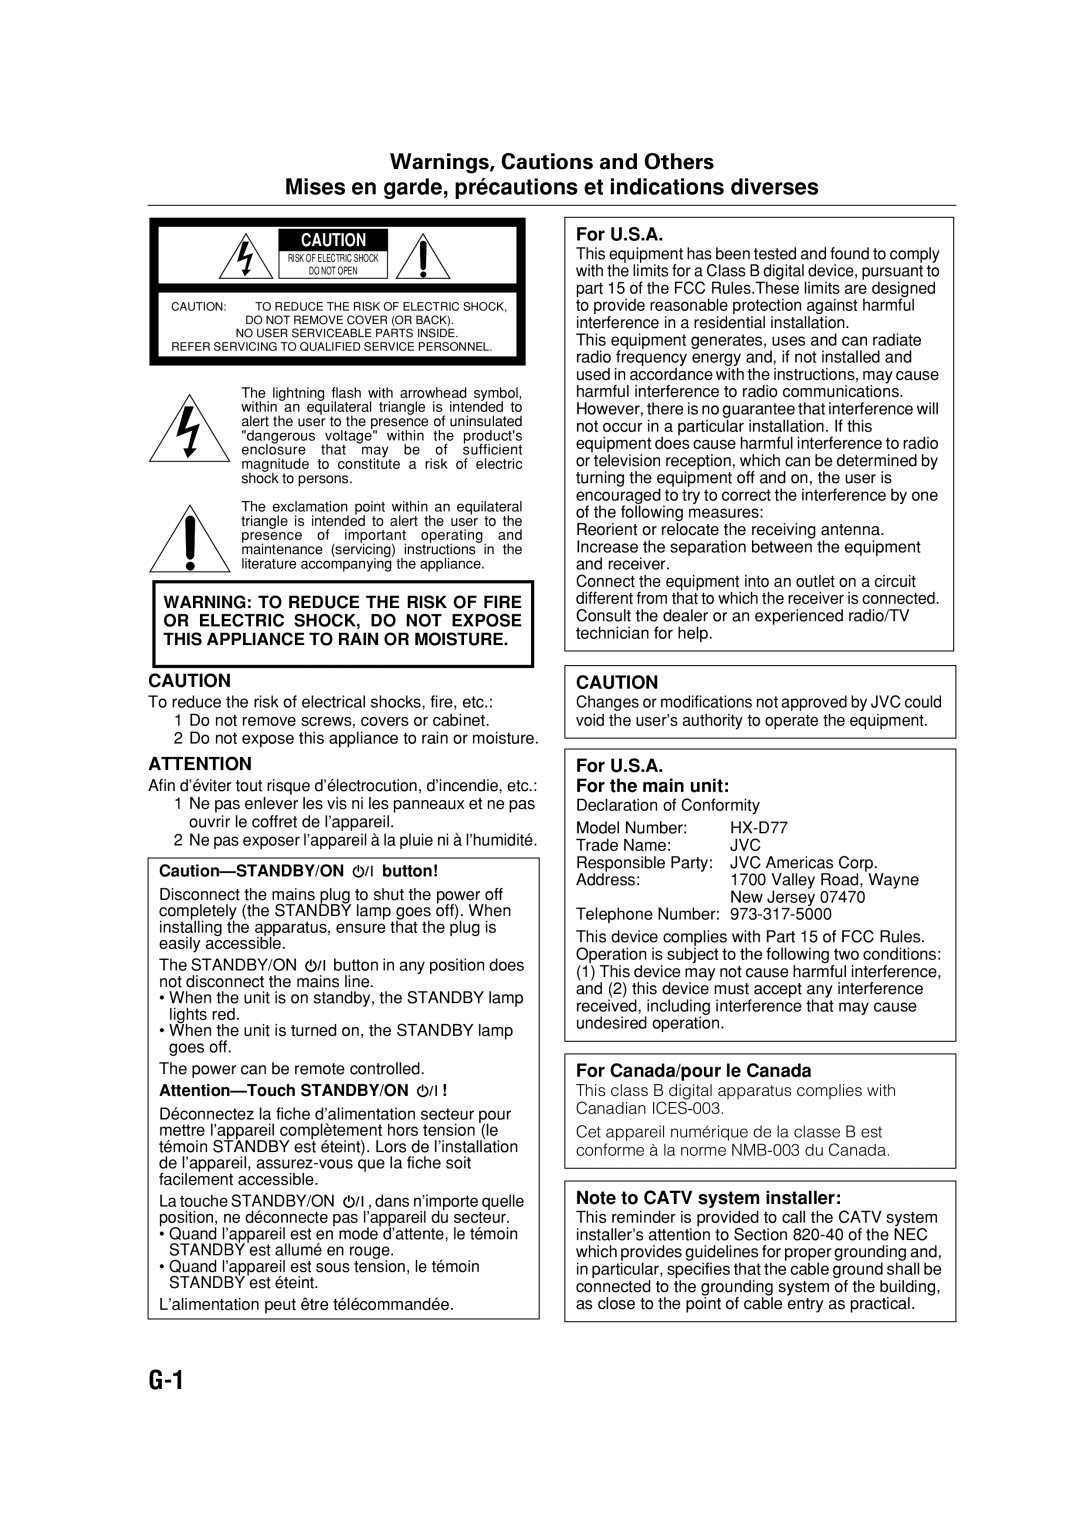 JVC HX-D77 manual Warnings, Cautions and Others, For U.S.A For the main unit, For Canada/pour le Canada 